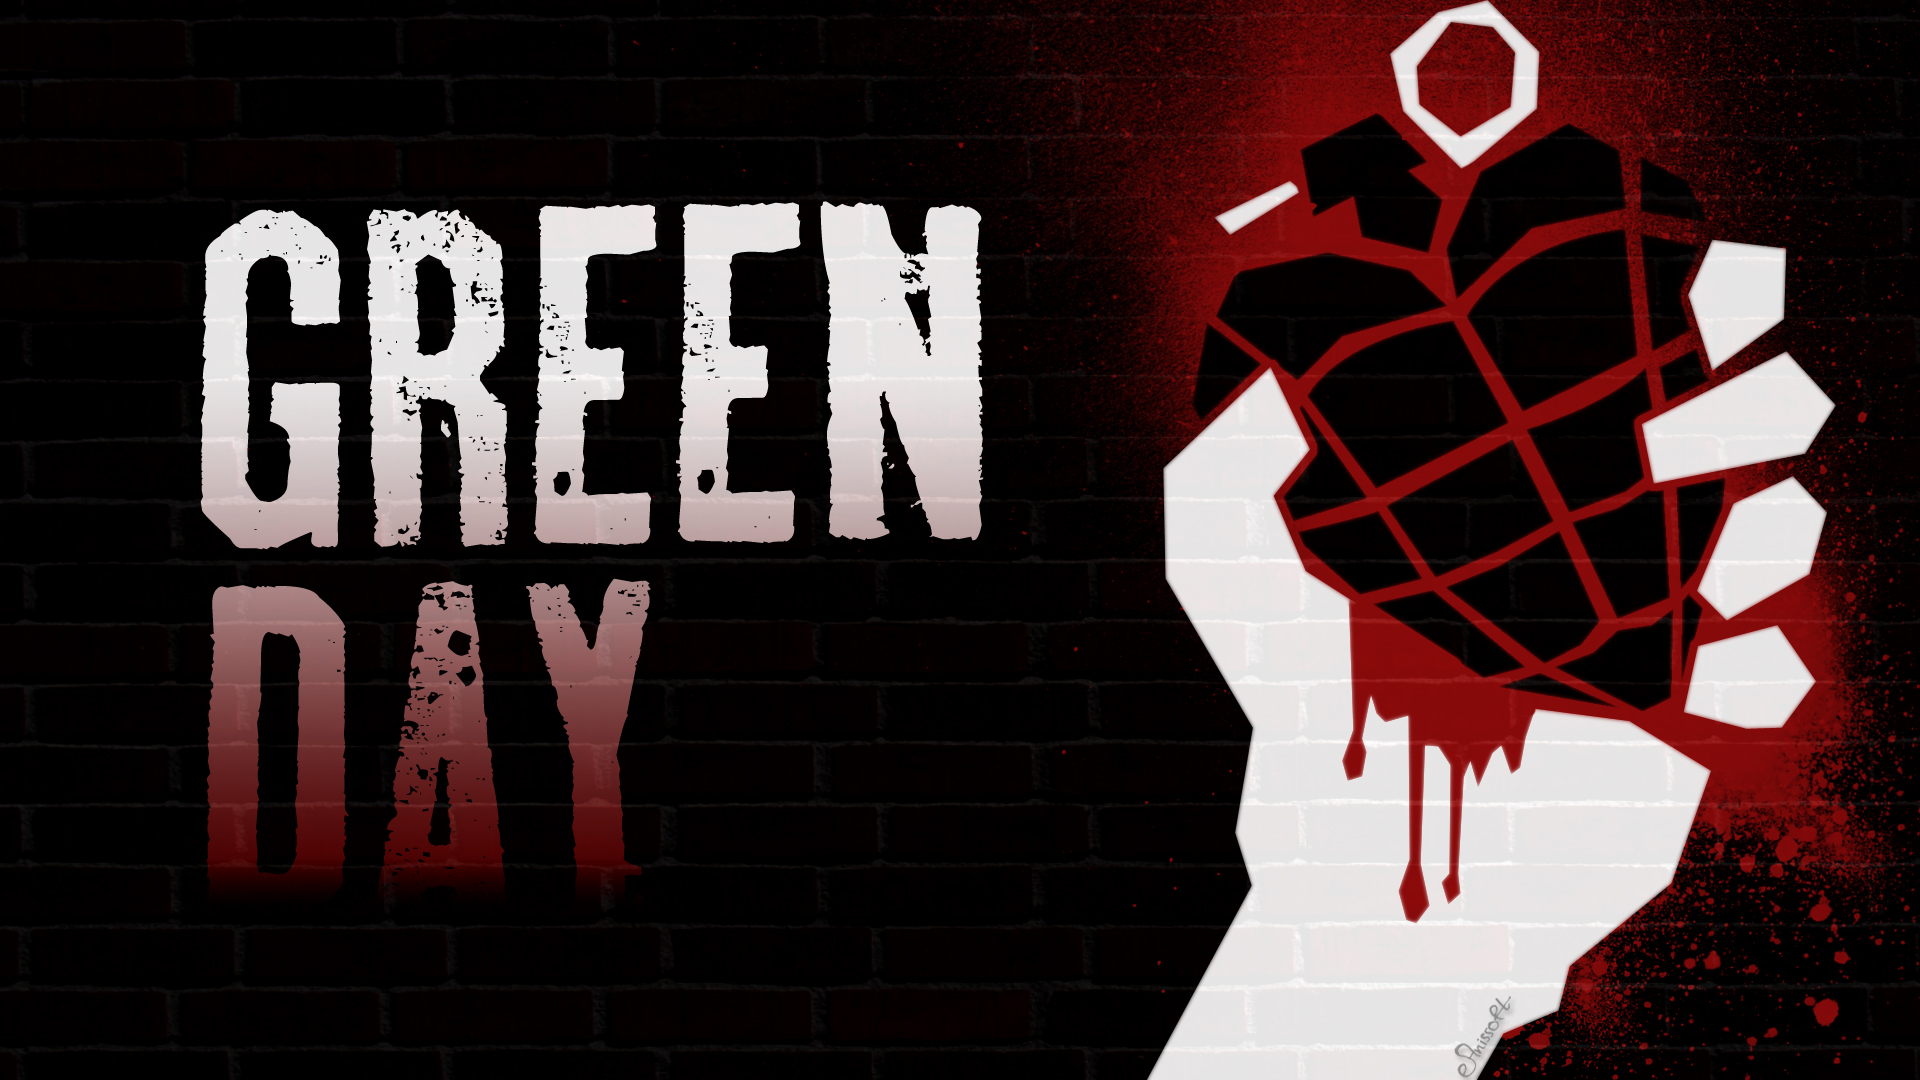 Green Day American idiot by Anissoft on DeviantArt